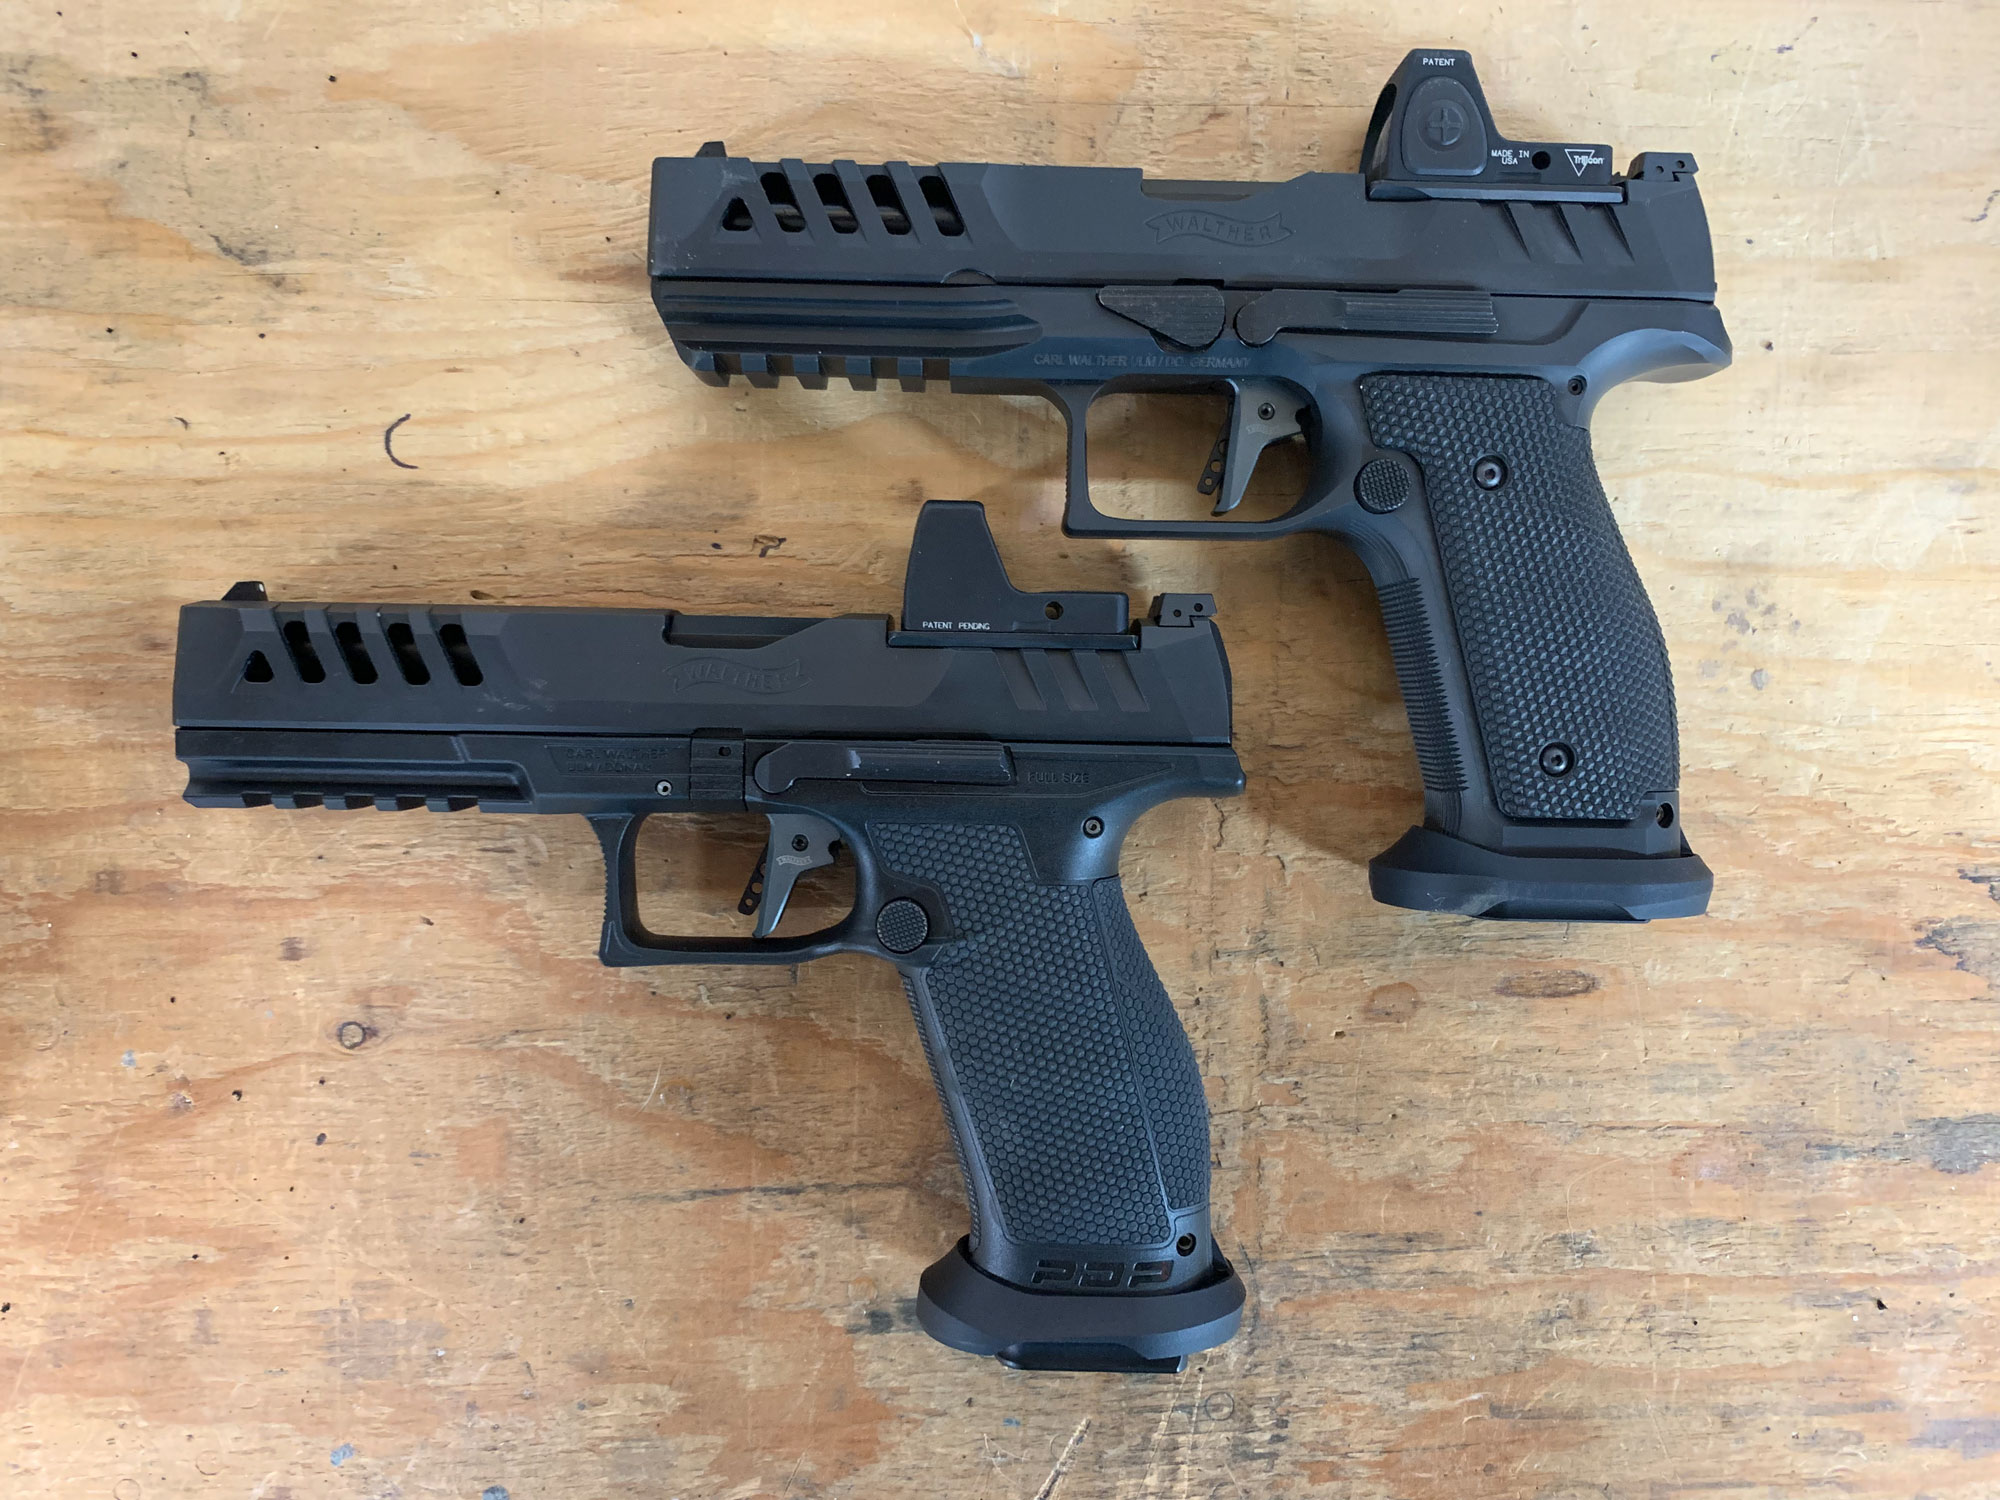 walther pdp steel frame and polymer frame match pistols